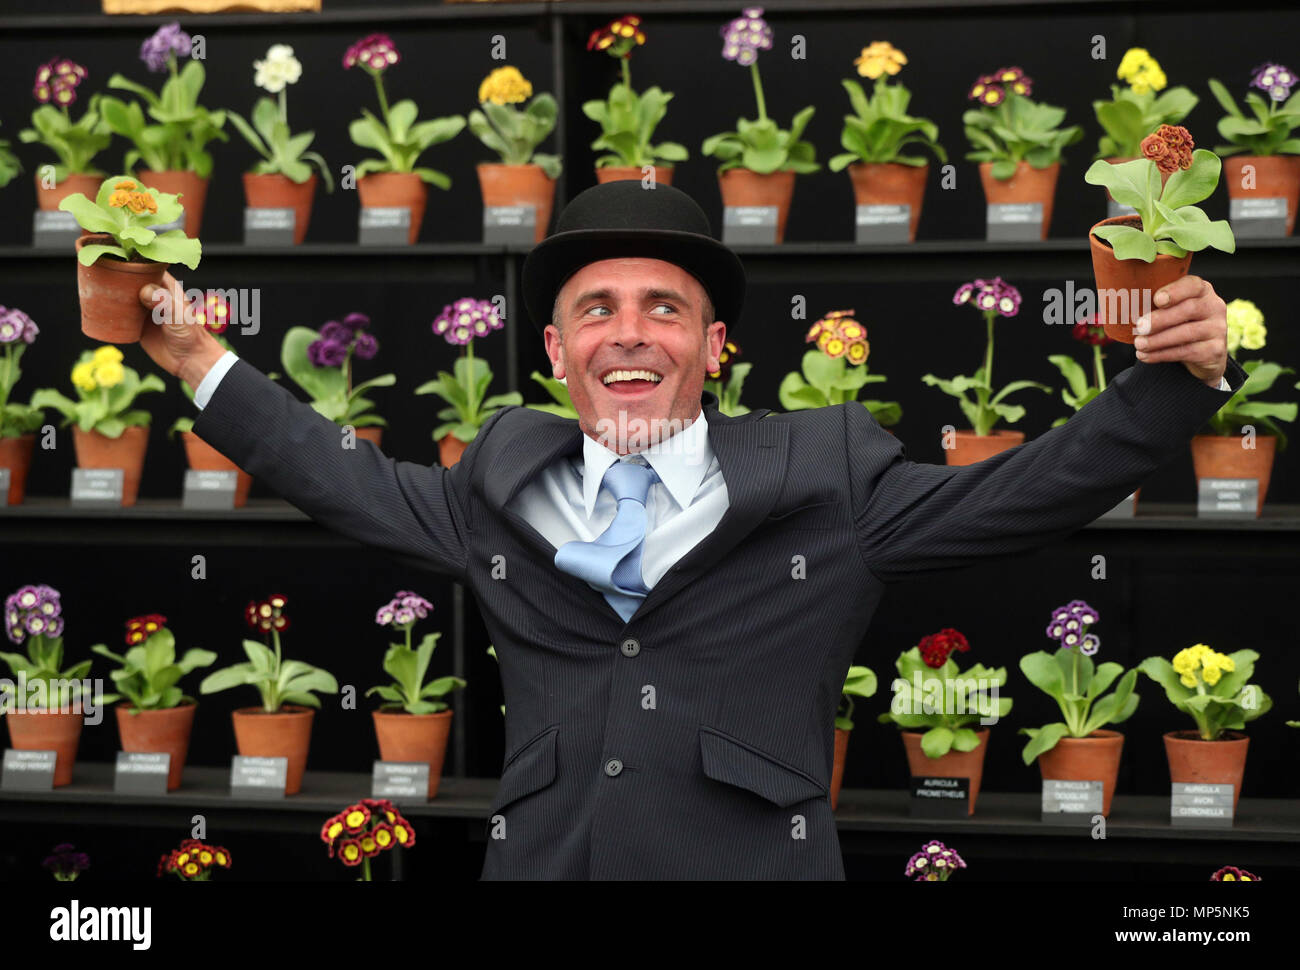 Simon Lockyer holds aloft two specimens of primula in front of his stand during the press day for this year's RHS Chelsea Flower Show at the Royal Hospital Chelsea, London. Stock Photo